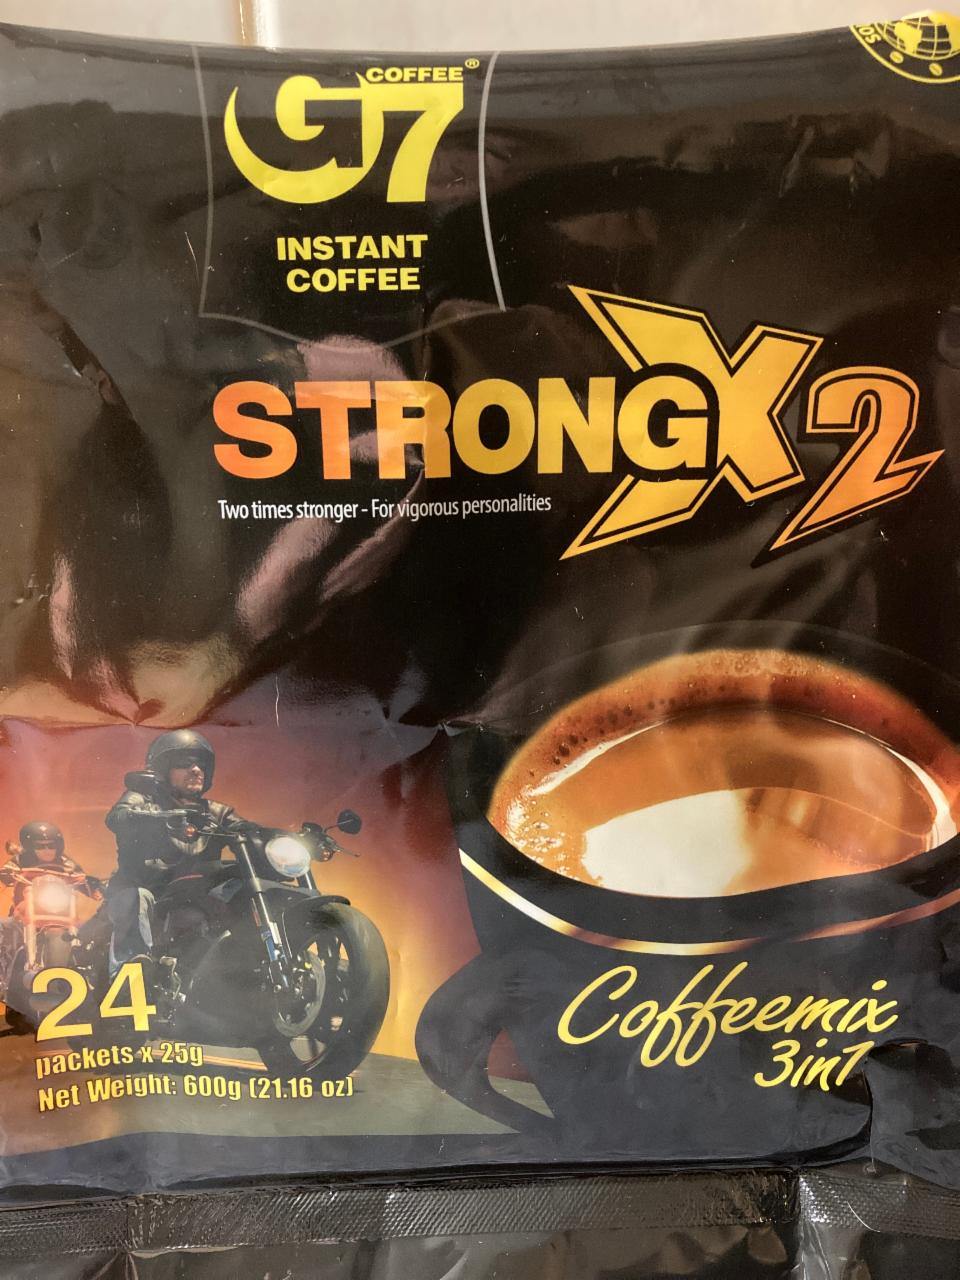 Fotografie - Strong X2 3in1 Instant Coffee G7